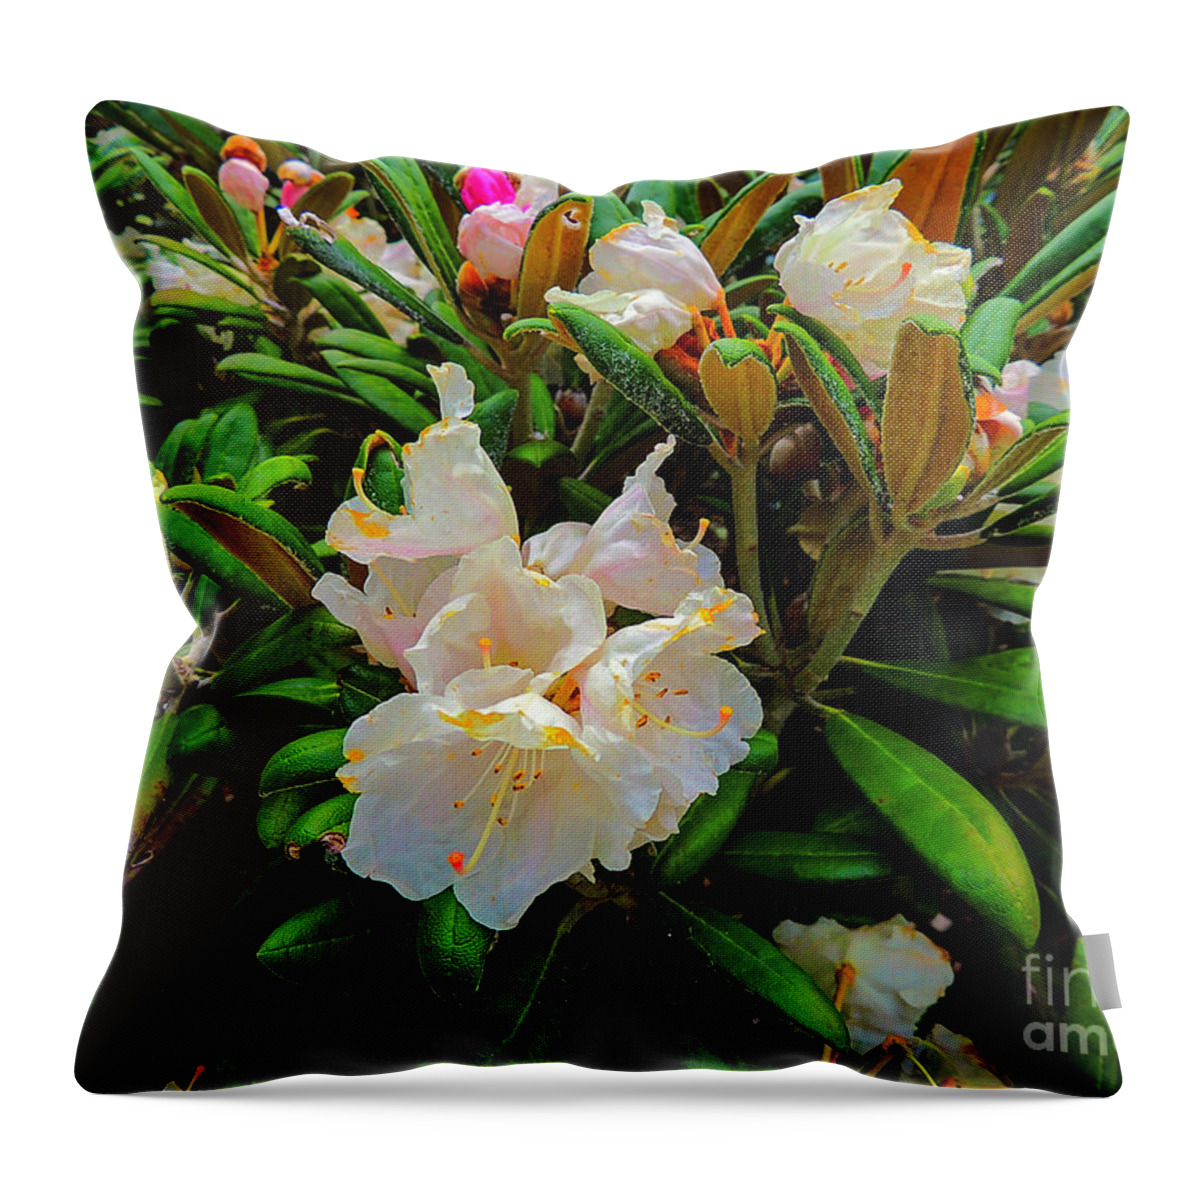 Full Bloom Throw Pillow featuring the photograph Full Bloom by Mim White